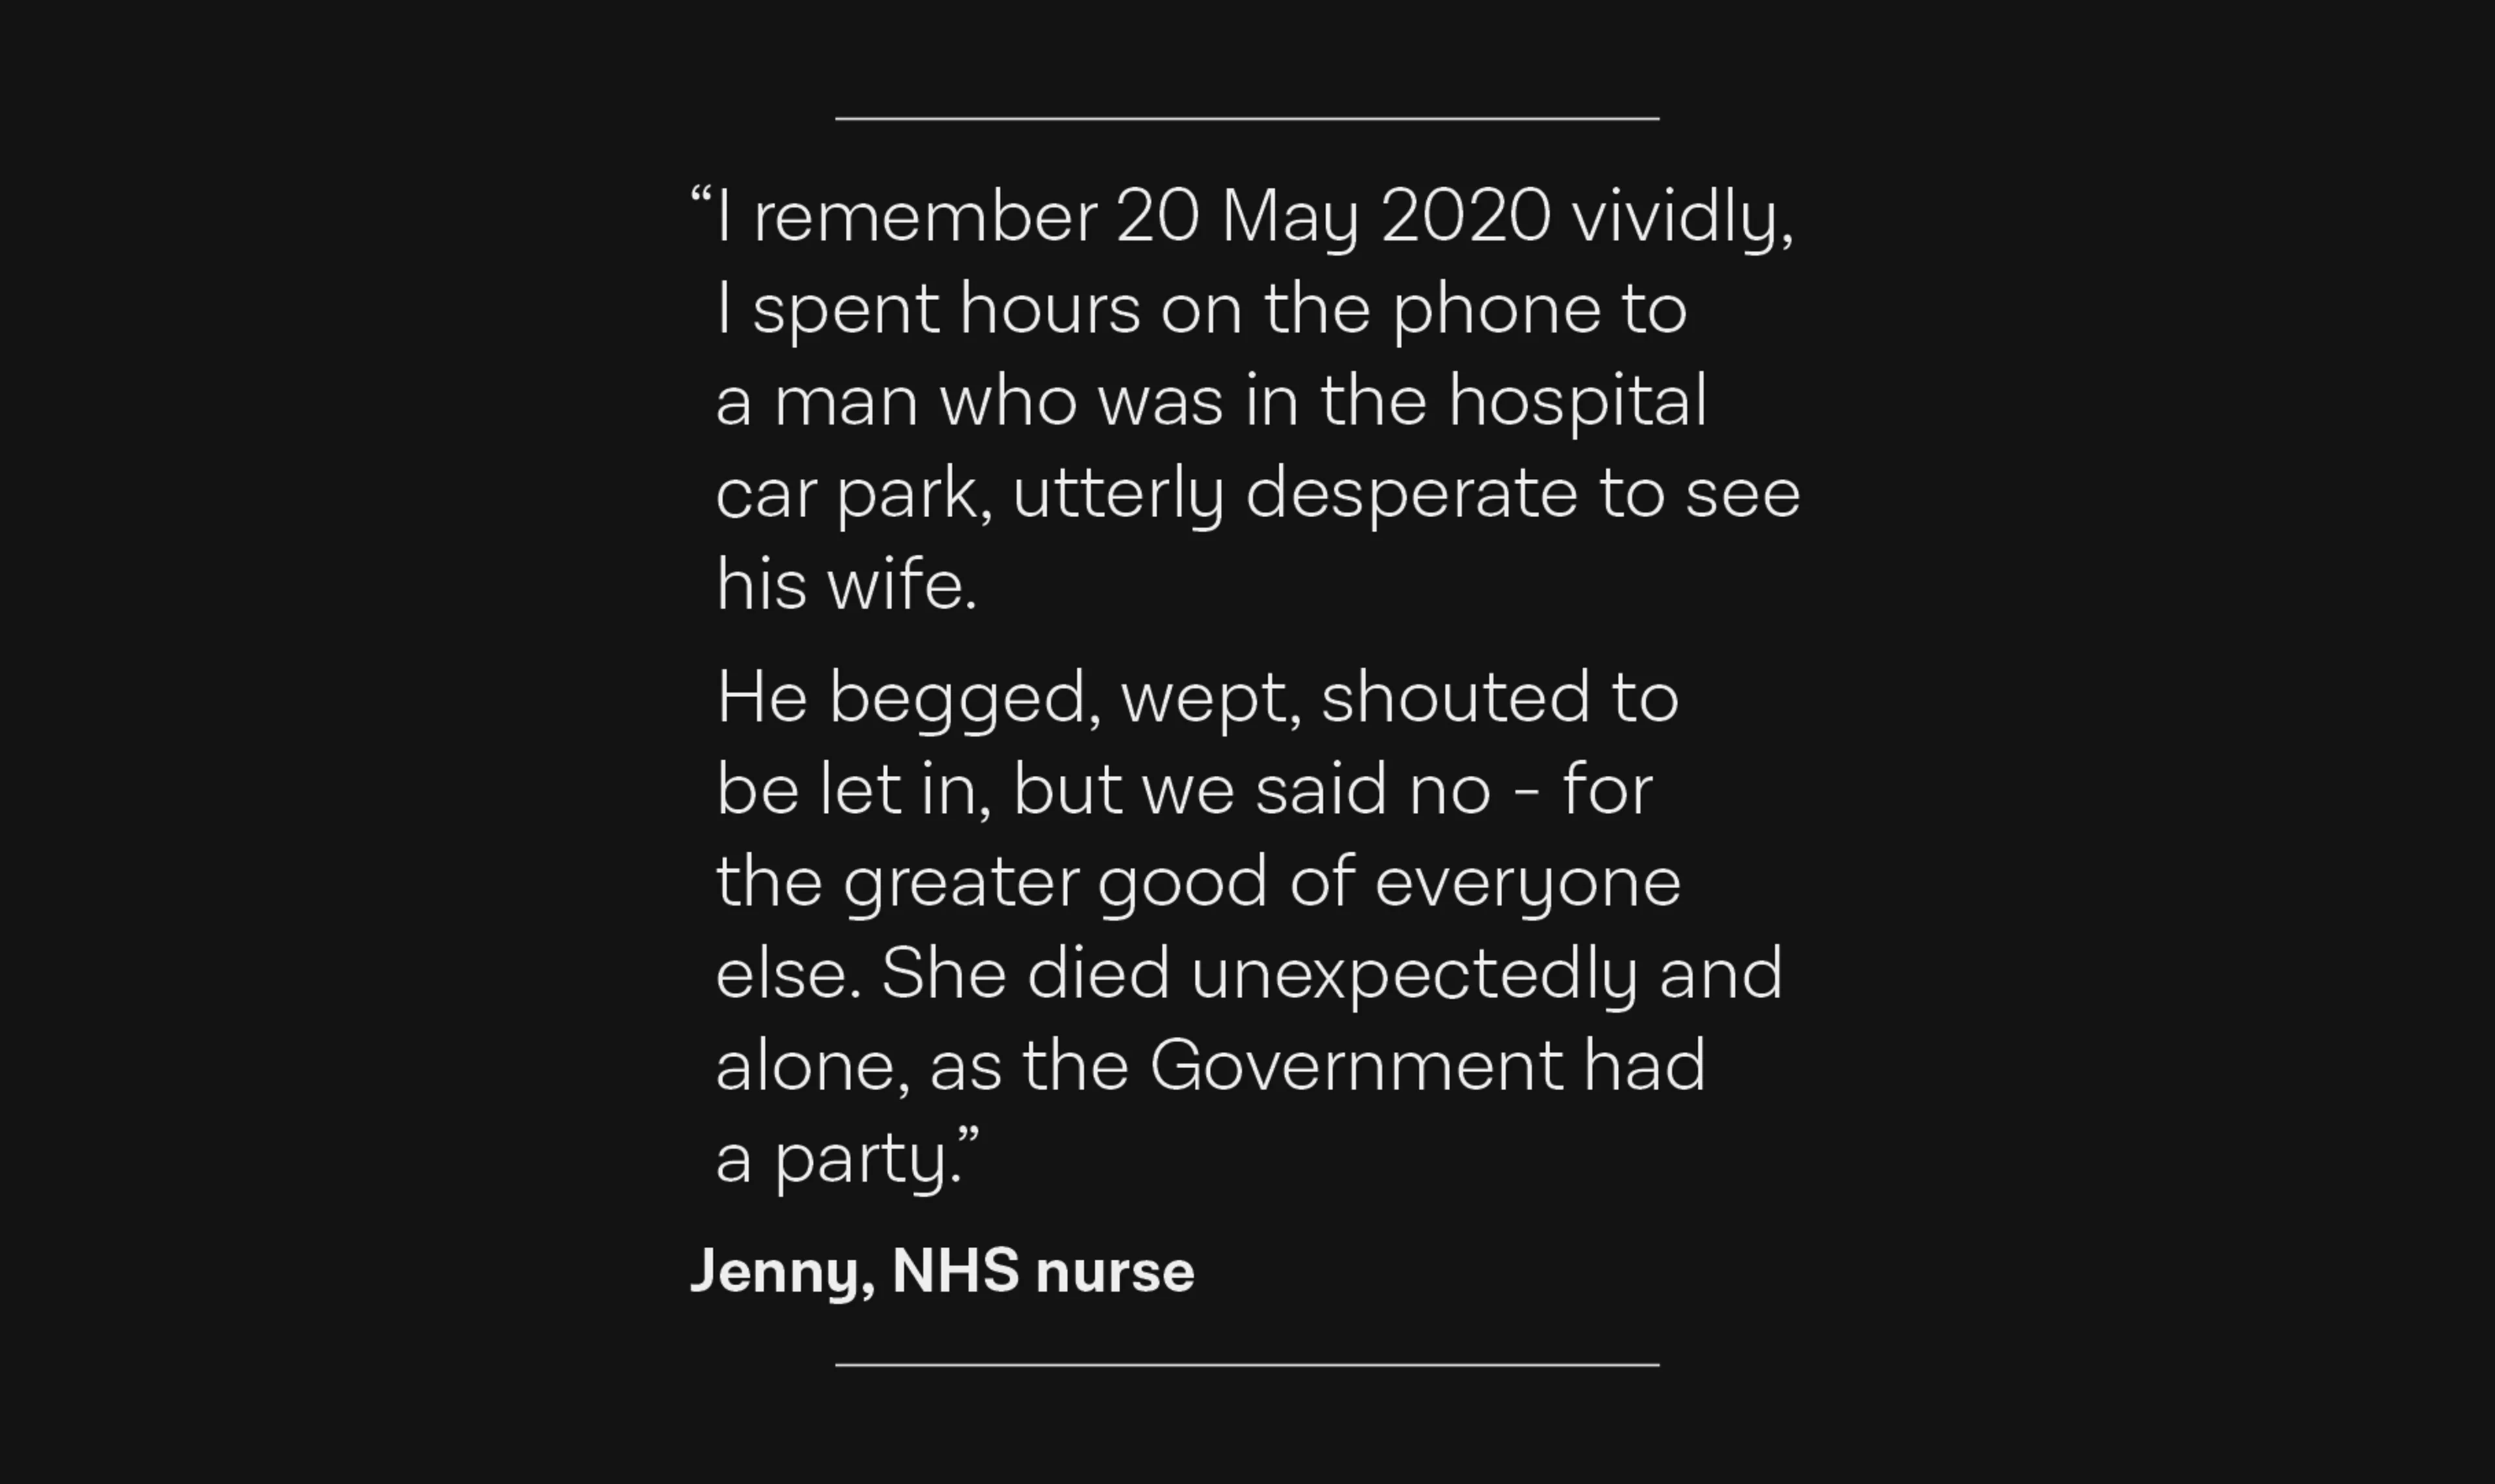 An NHS nurse’s account of a man denied visitation to his wife who died alone in the hospital. The quote reads: I remember 20 May 2020 vividly. I spent hours on the phone to a man who was in the hospital car park, utterly desperate to see his wife. He begged, wept, shouted to be let in, but we said no - for the greater good of everyone else. She died unexpectedly and alone, as the Government had a party.